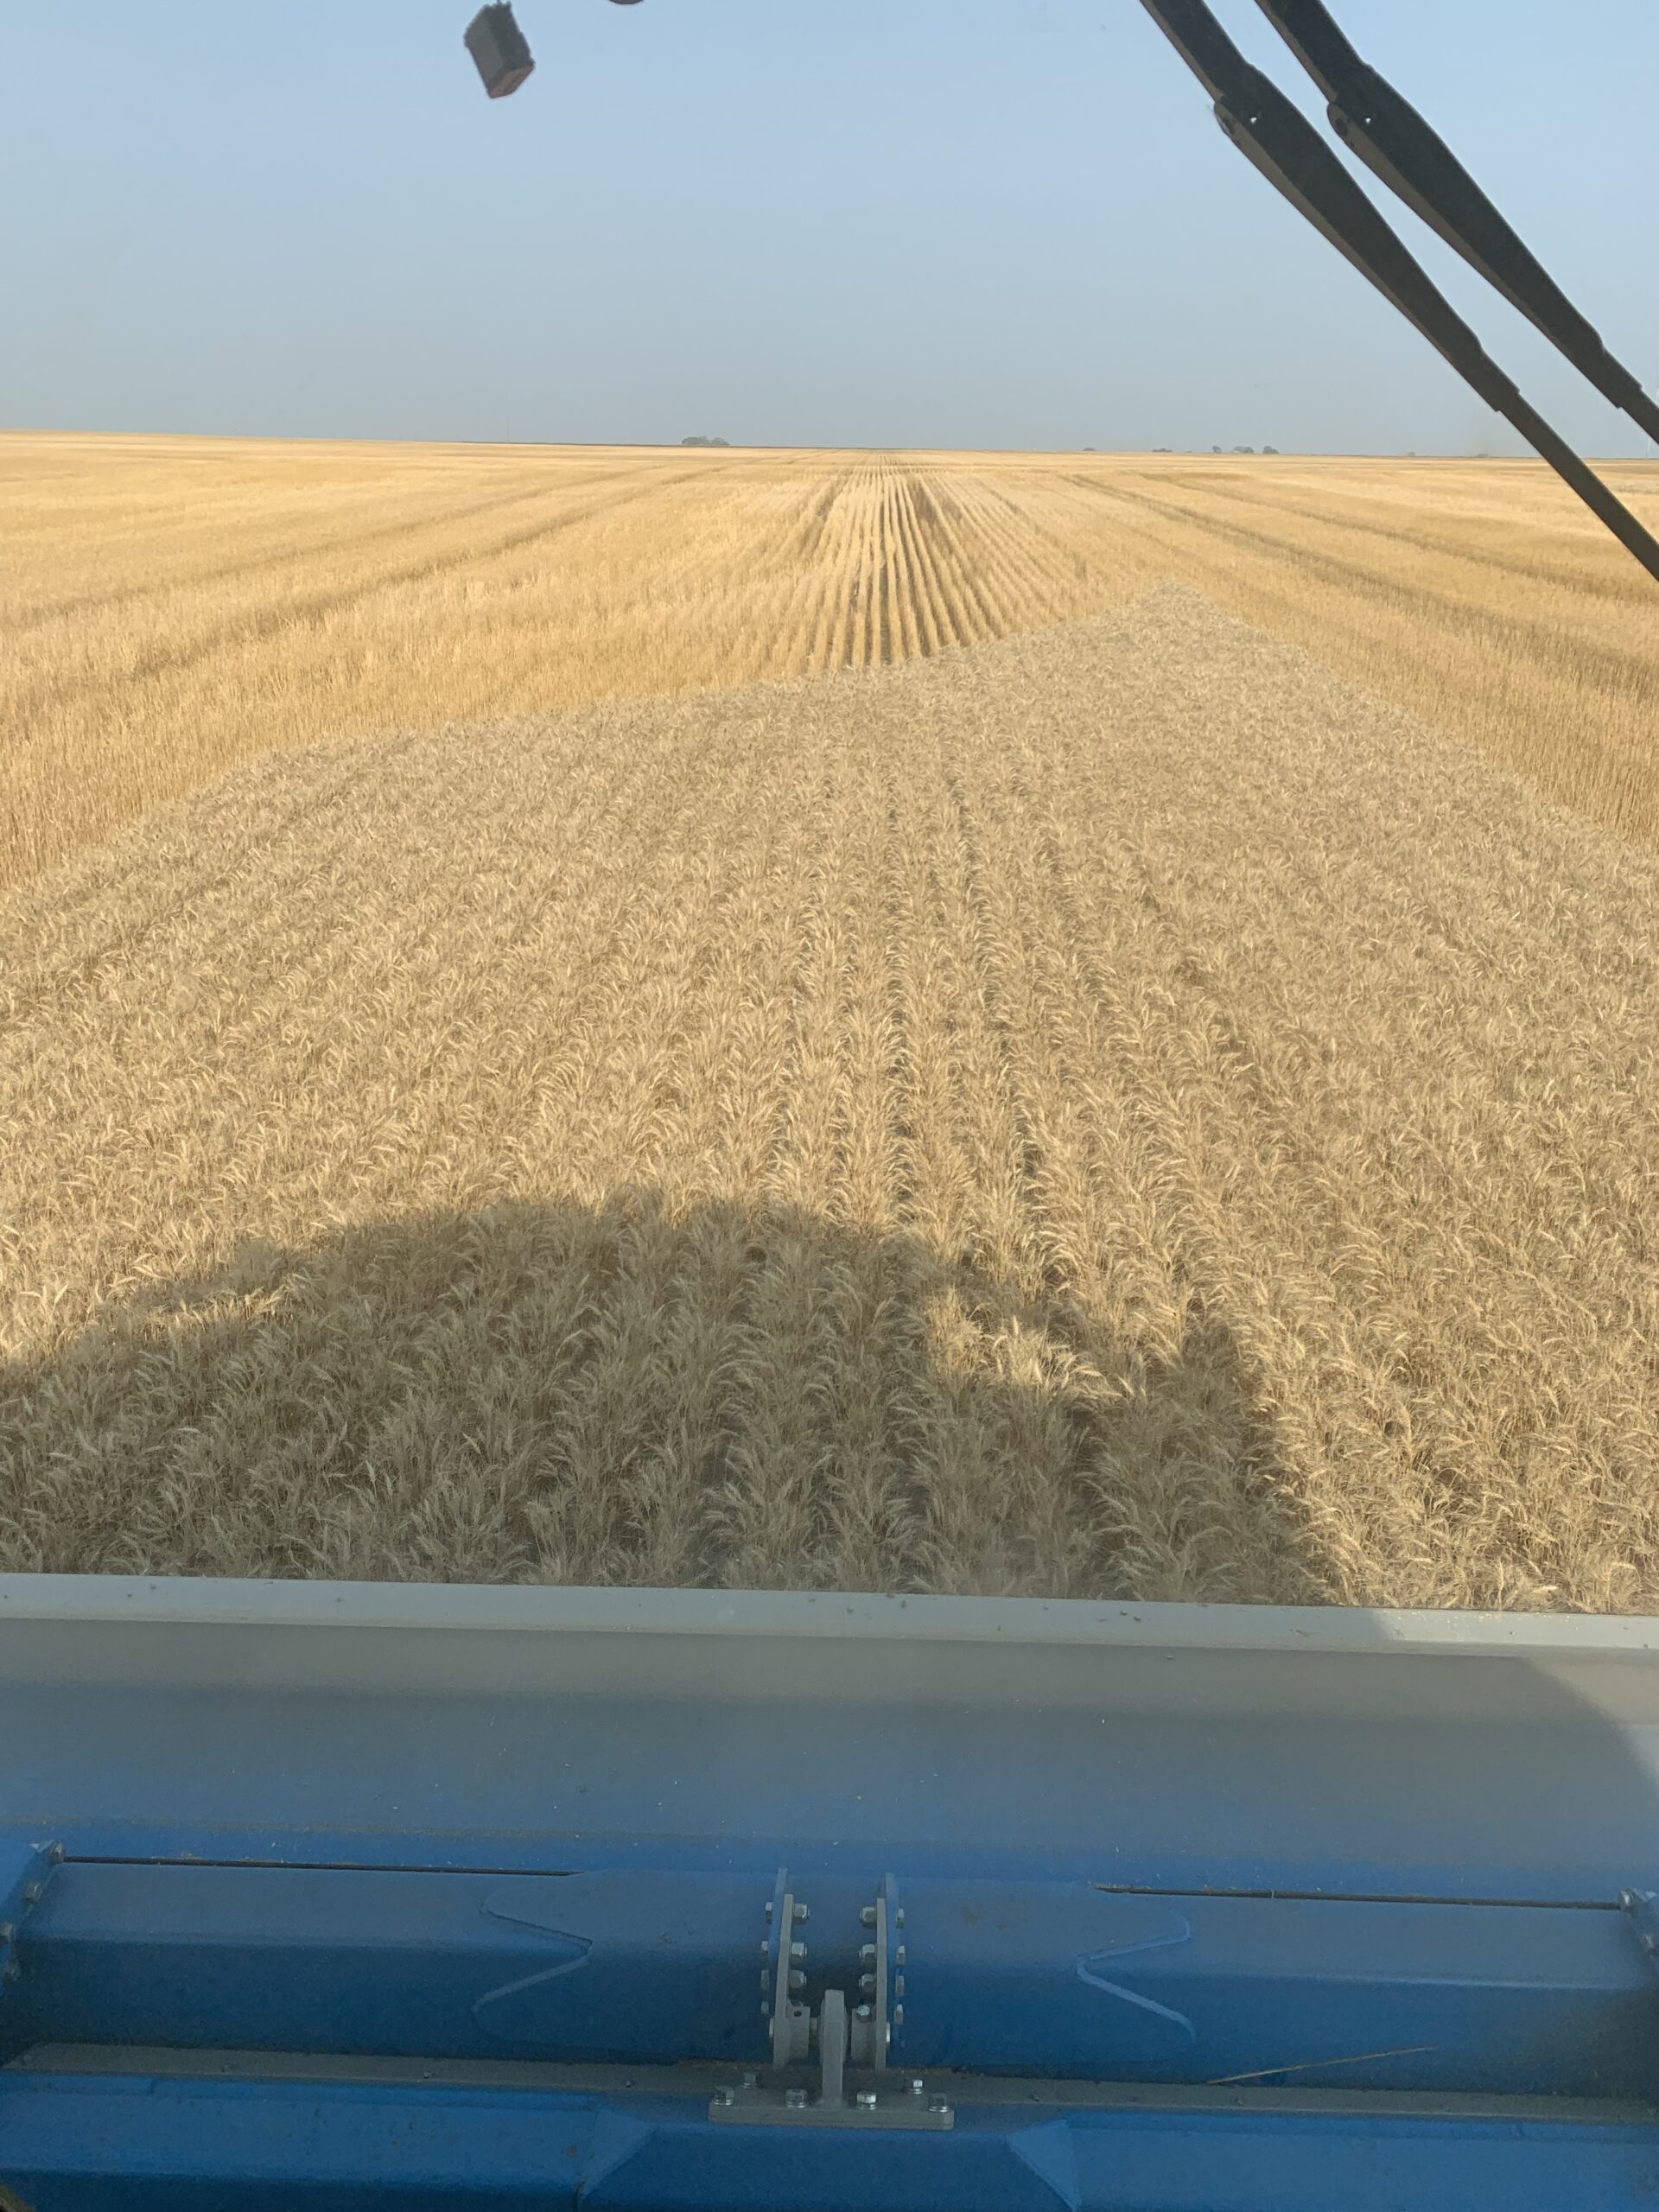 Cronin Farms uses stripper combine heads to harvest wheat in order to leave behind useful stubble which will protect the soil, aid moisture retention, and build soil organic matter. Courtesy photo.